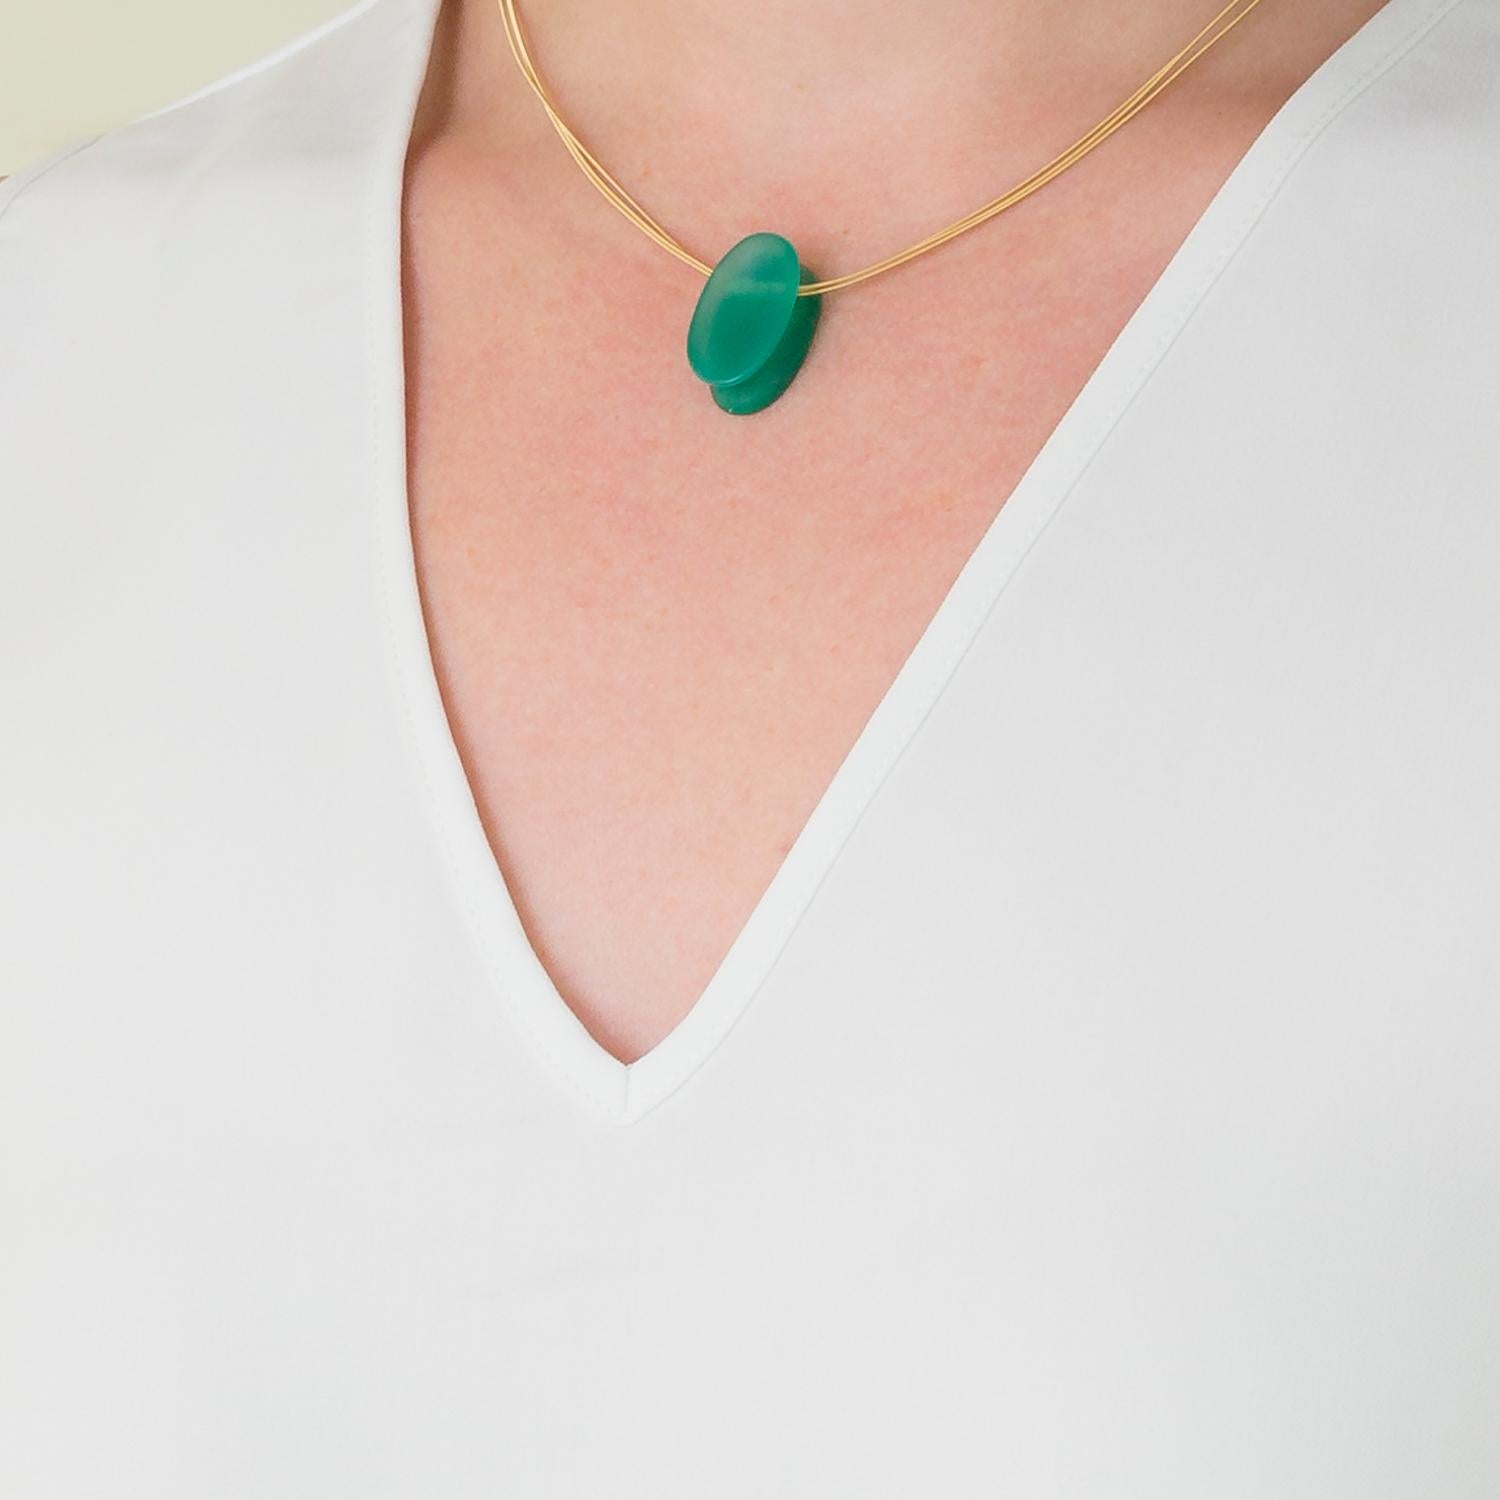 Contemporary Dieter Lorenz Pendant, Green Agate on 18 Karat Yellow Gold Necklace For Sale